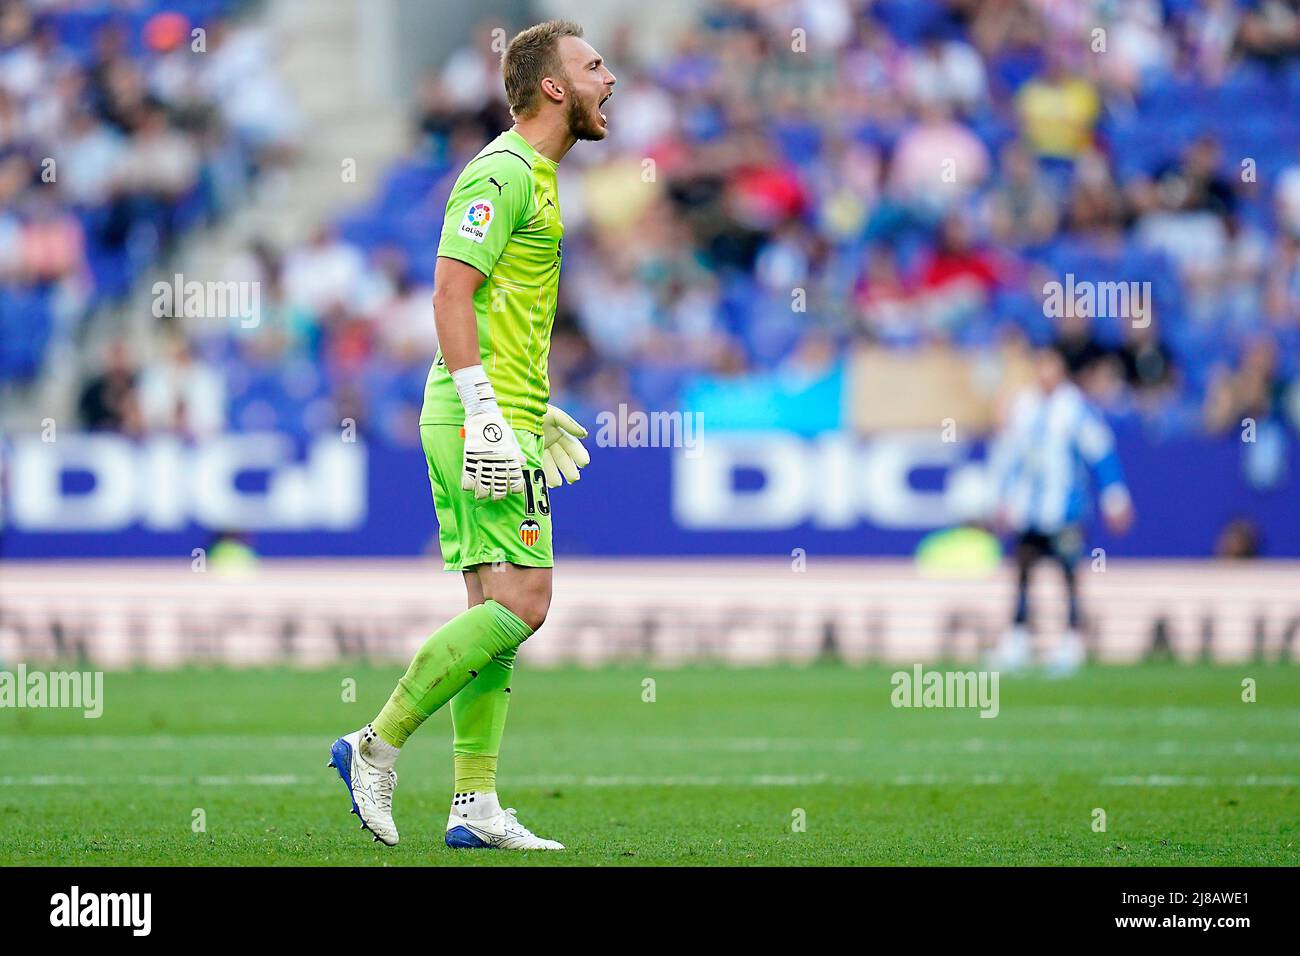 Jasper Cillessen of Valencia CF during the La Liga match between RCD  Espanyol and Valencia CF played at RCDE Stadium on May 14, 2022 in  Barcelona, Spain. (Photo by PRESSINPHOTO Stock Photo - Alamy